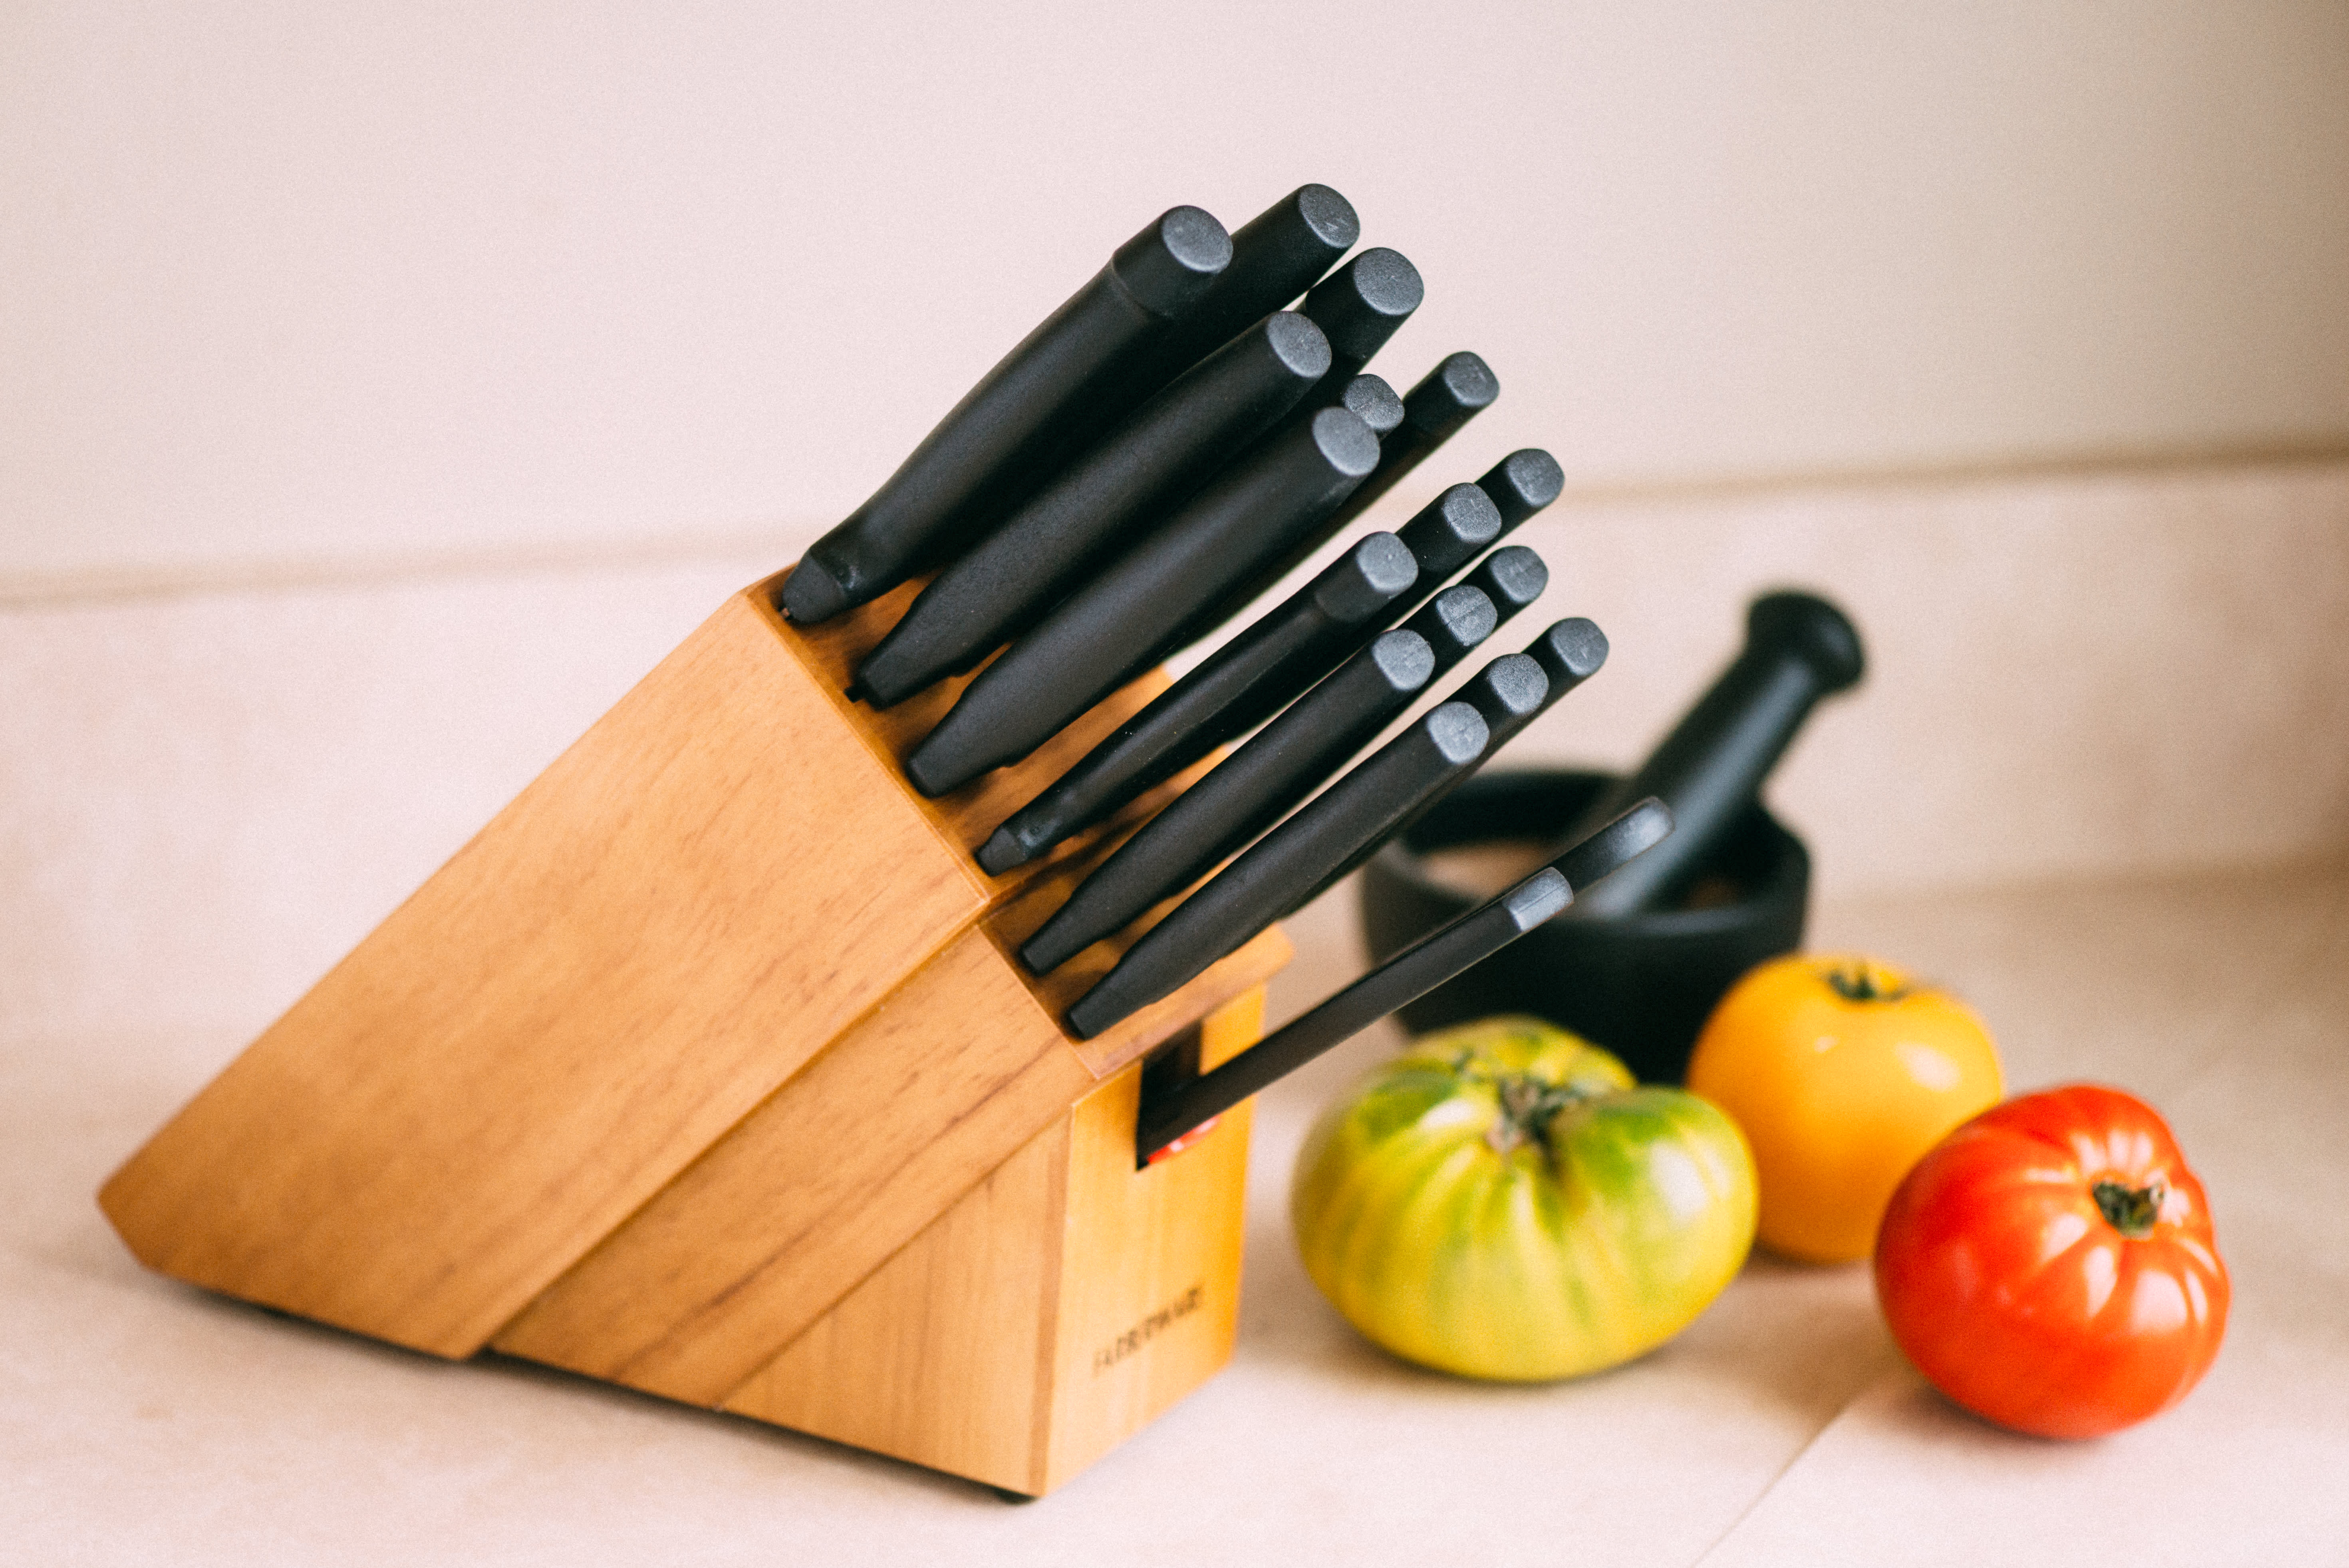 What Are All the Knives in A Knife Block For?